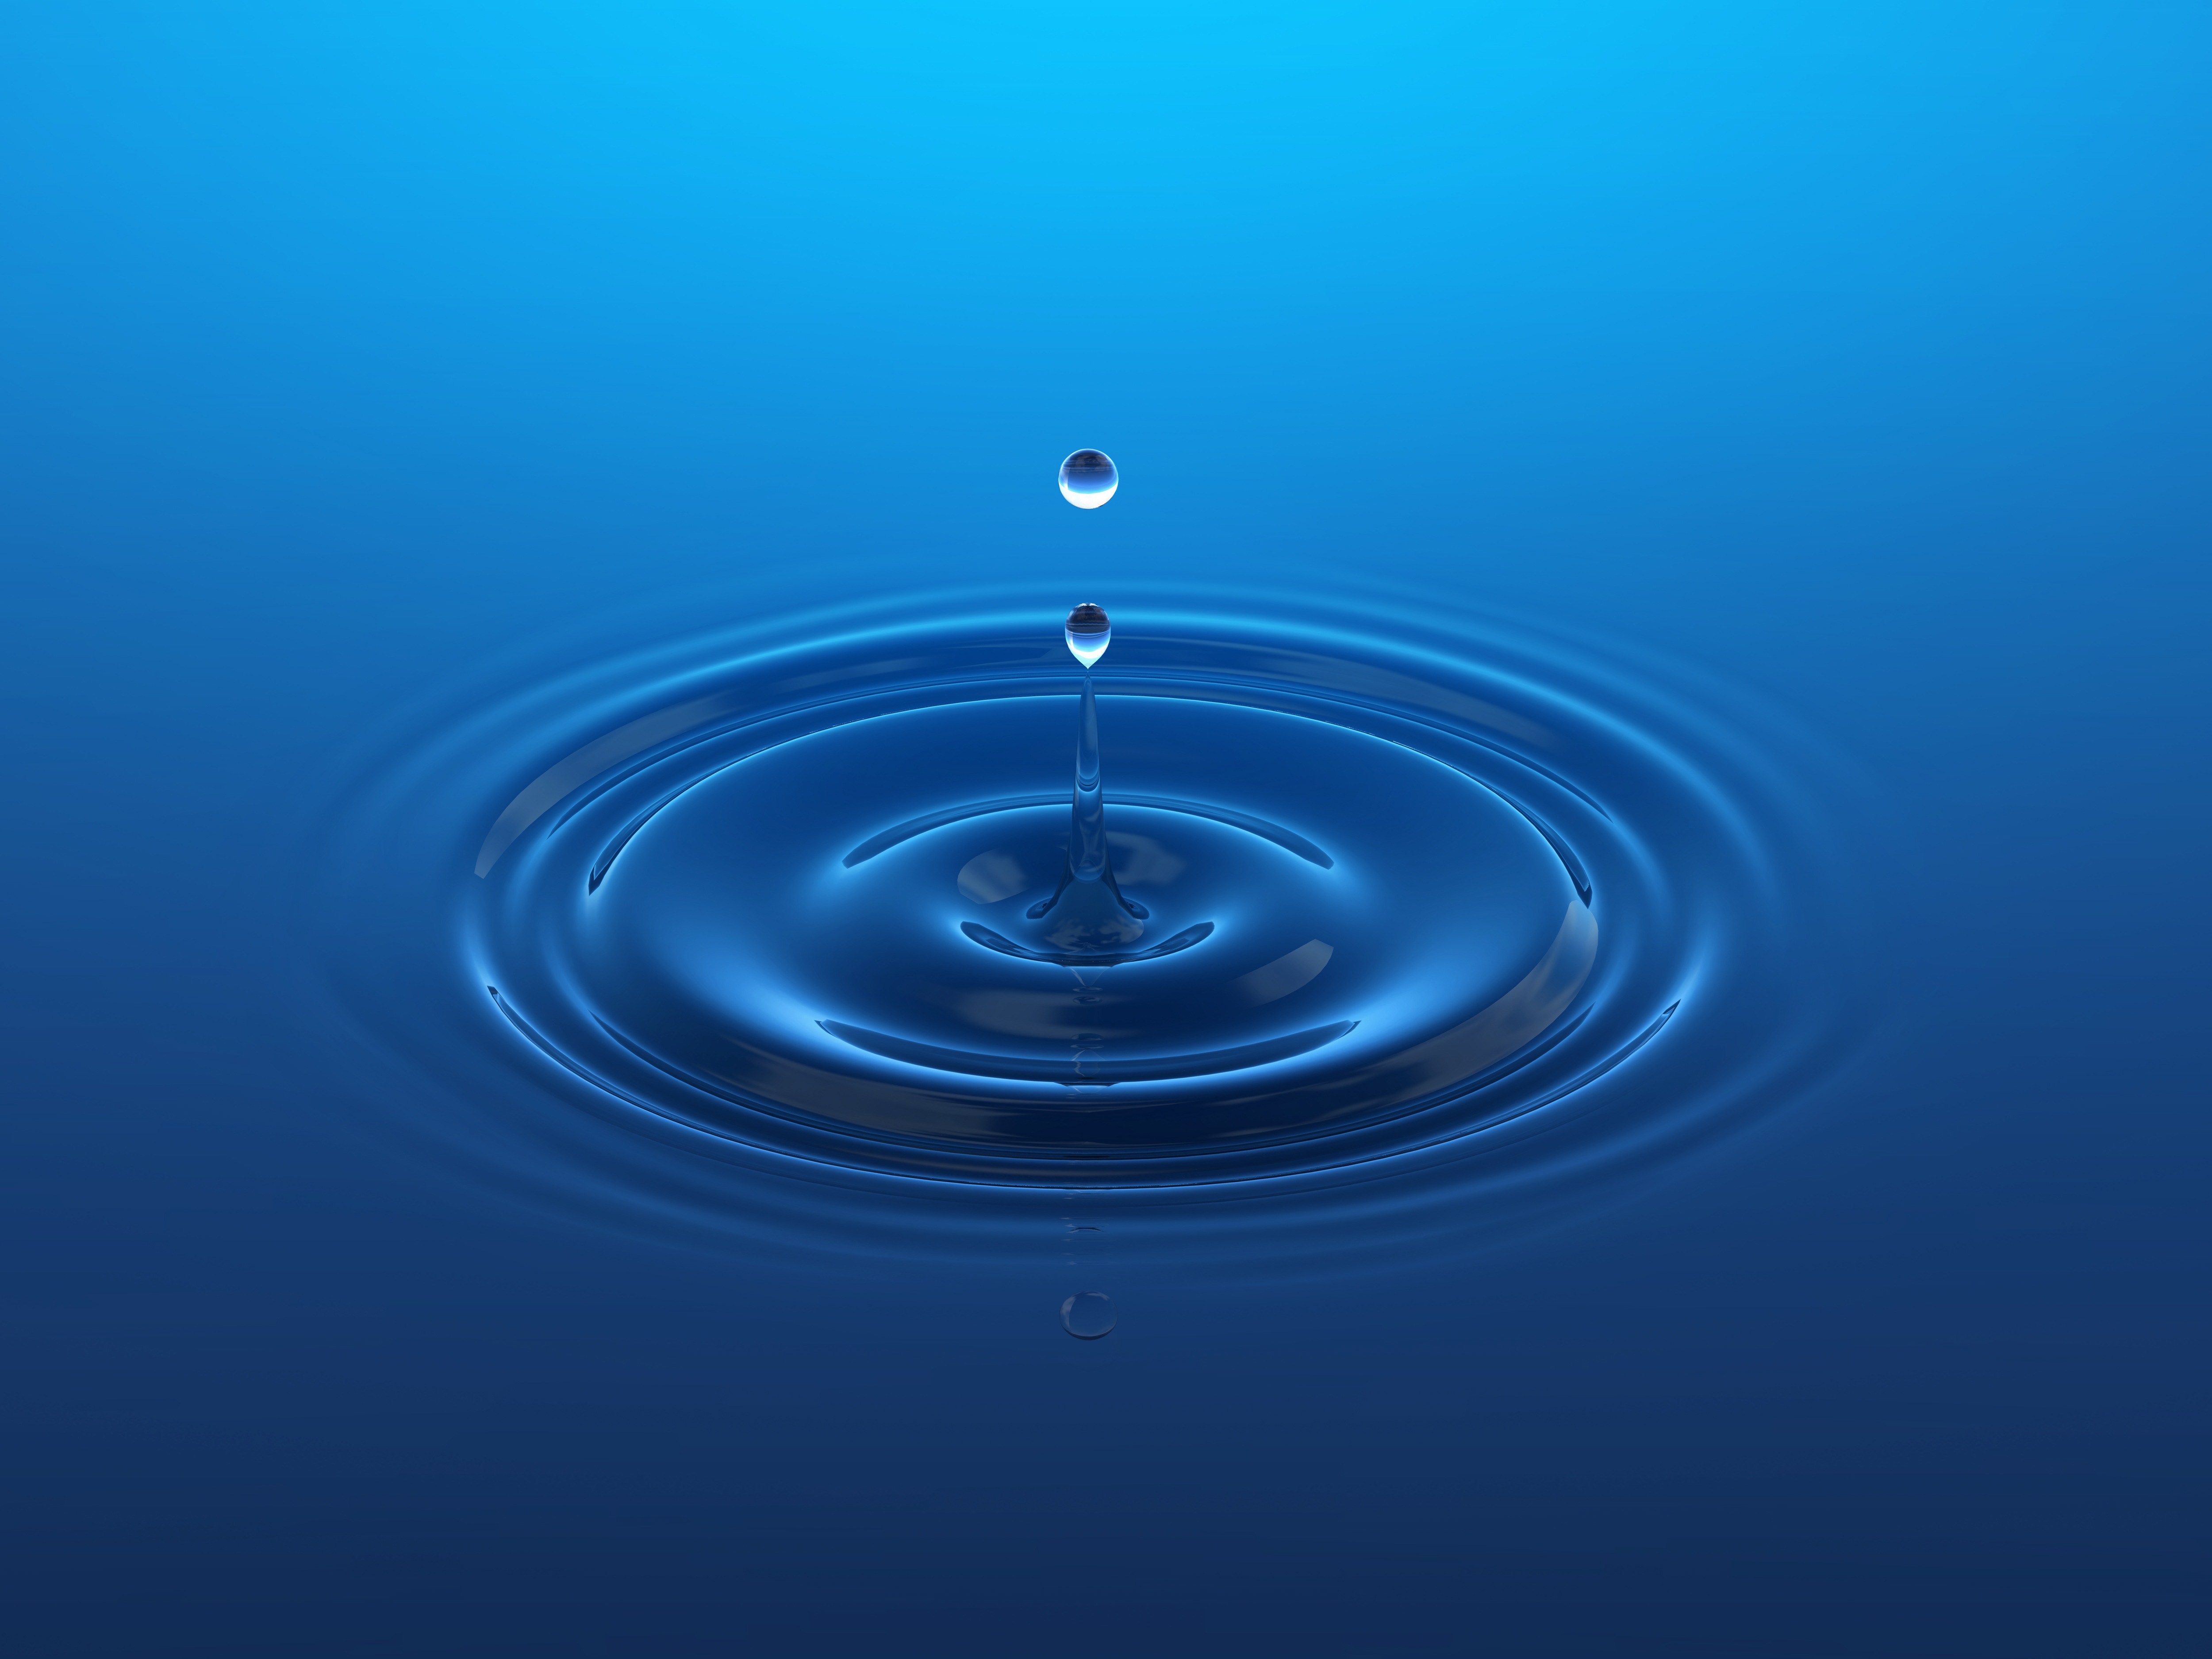 Water Droplets iPhone Wallpaper HD - iPhone Wallpapers